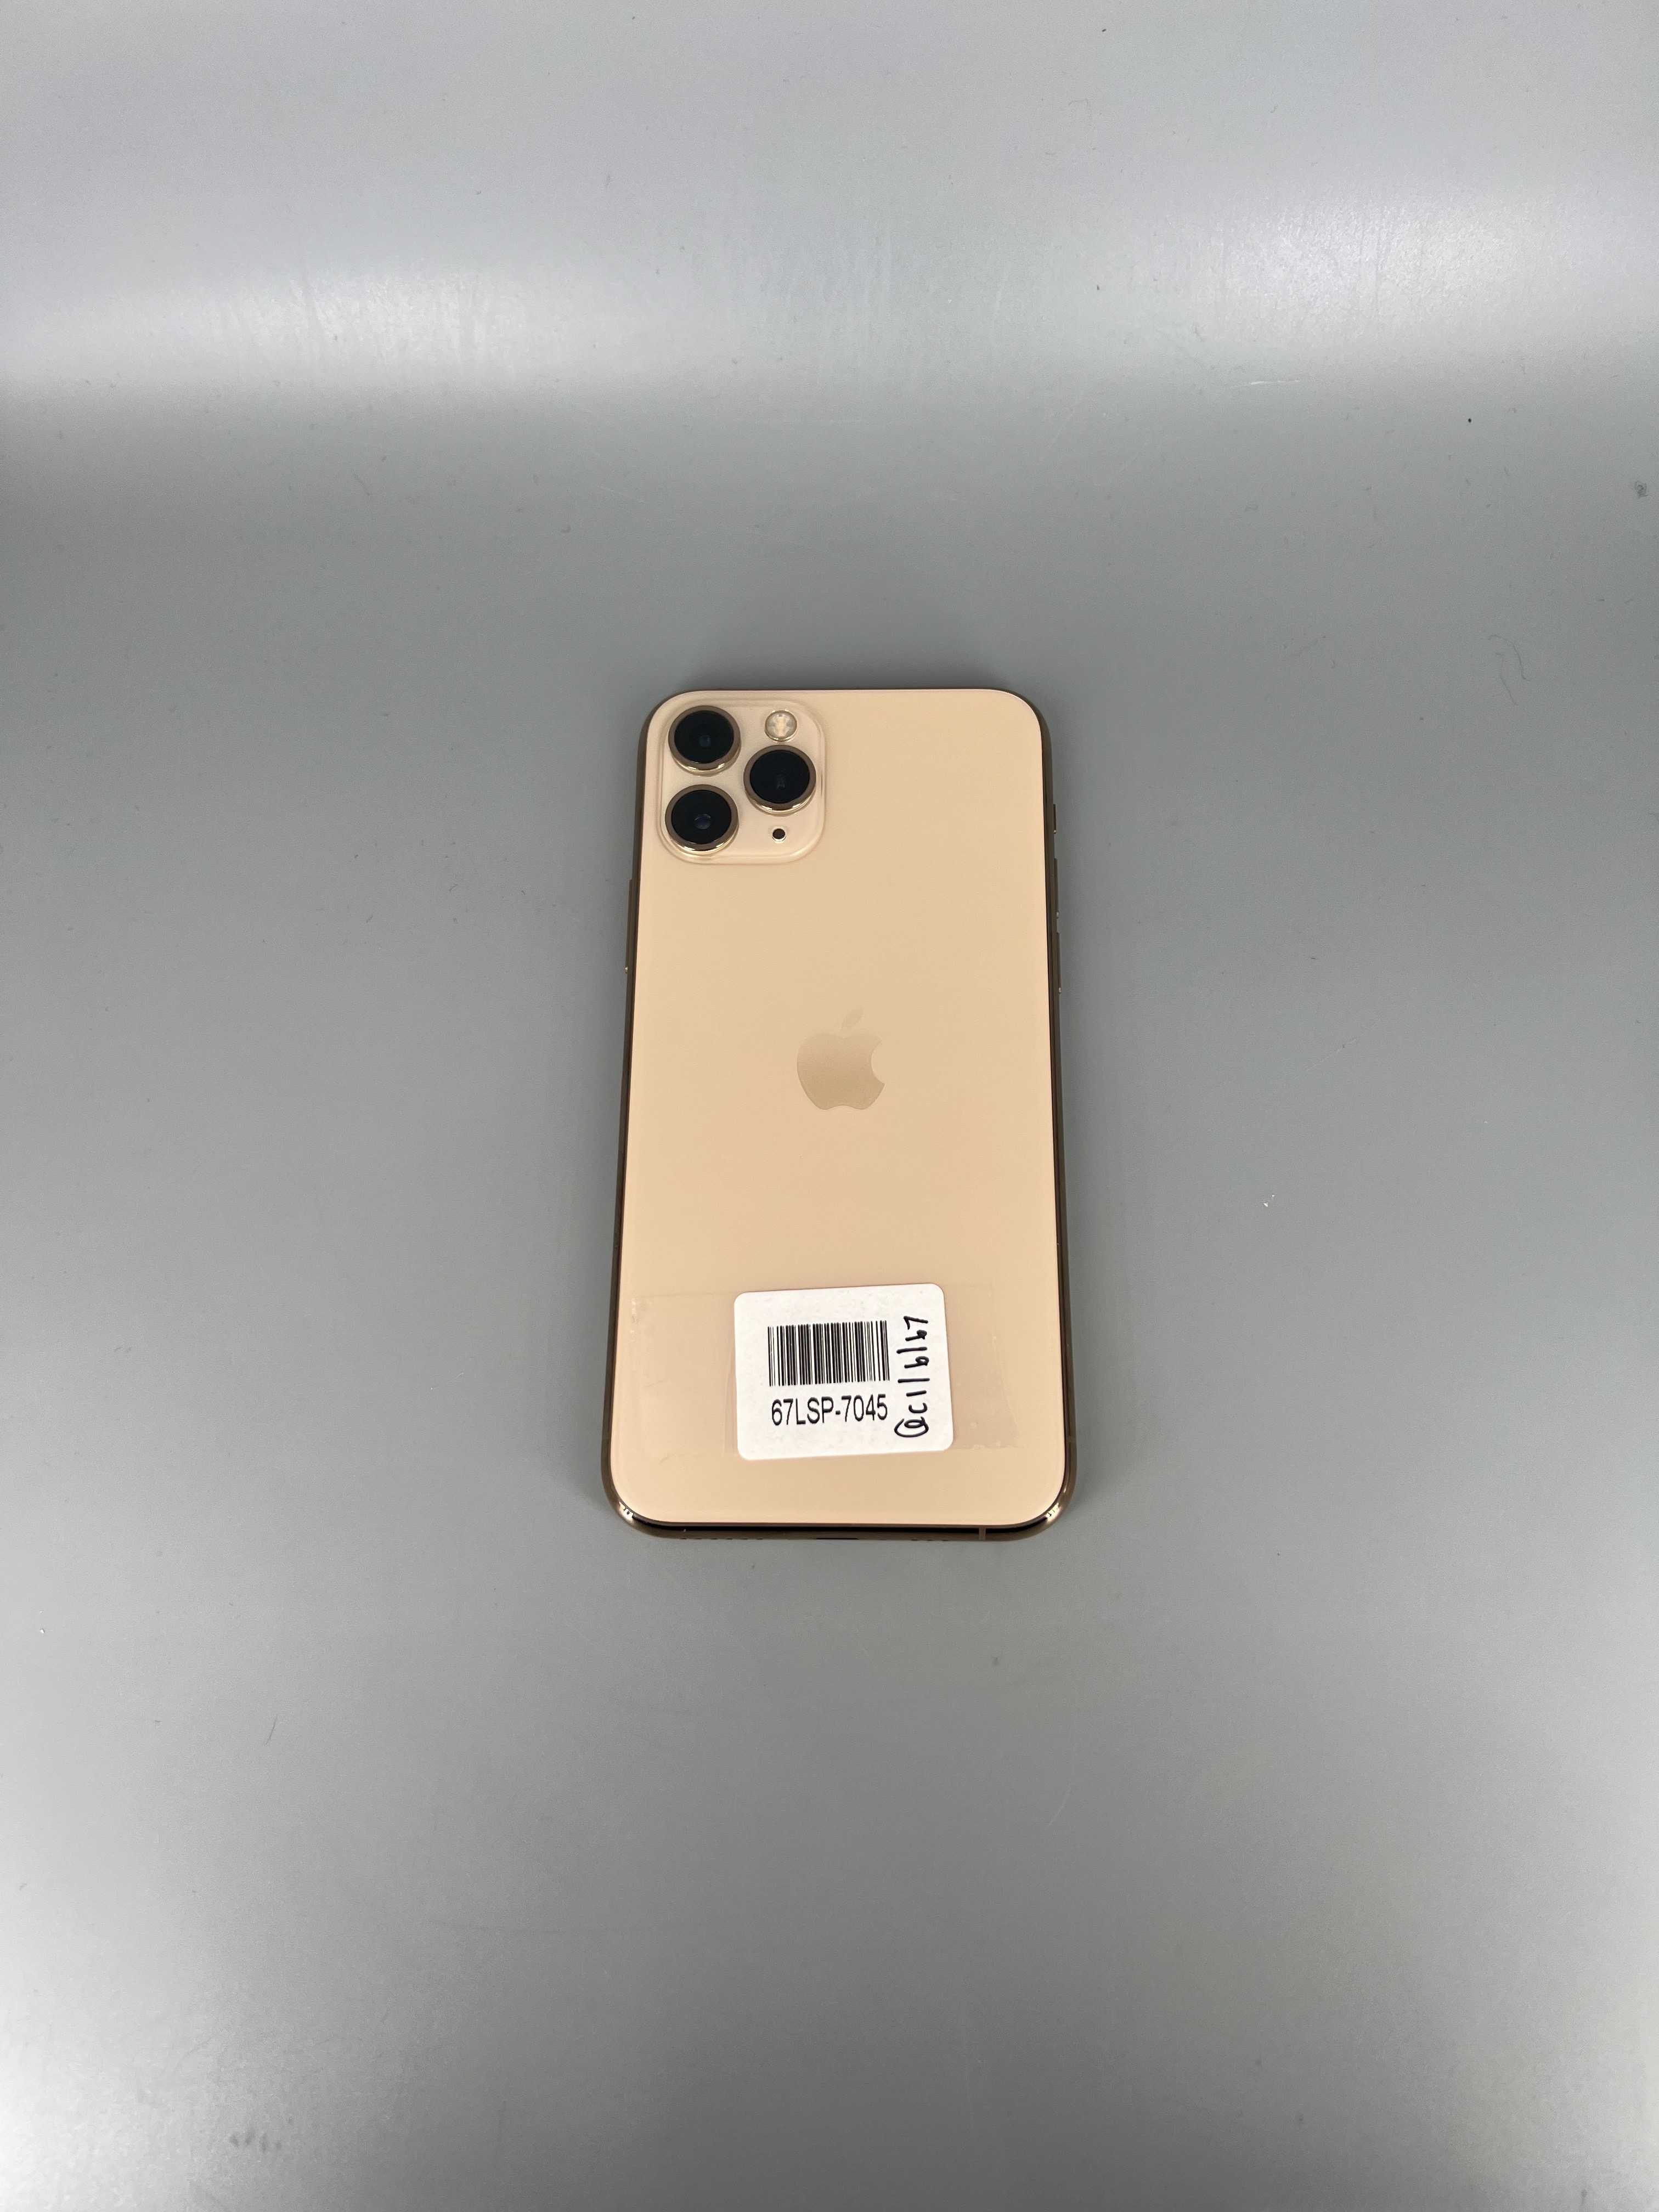 Used iPhone 11 Pro 64gb Gold 67LSP-7045